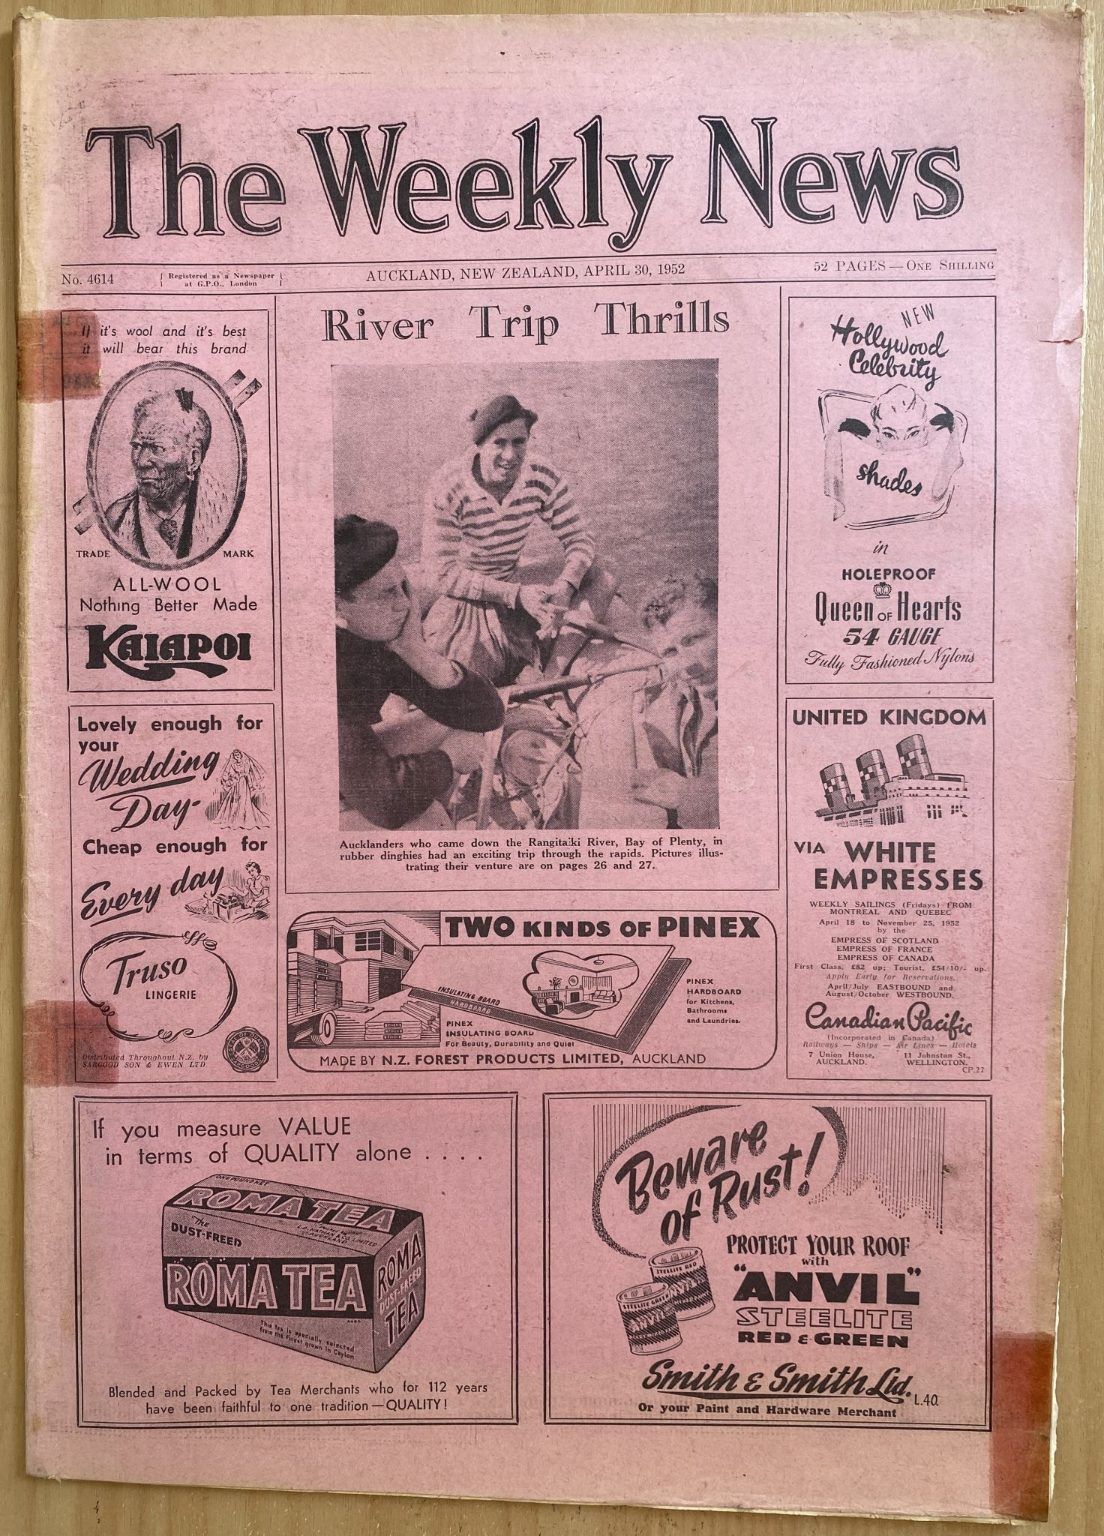 OLD NEWSPAPER: The Weekly News - No. 4614, 30 April 1952